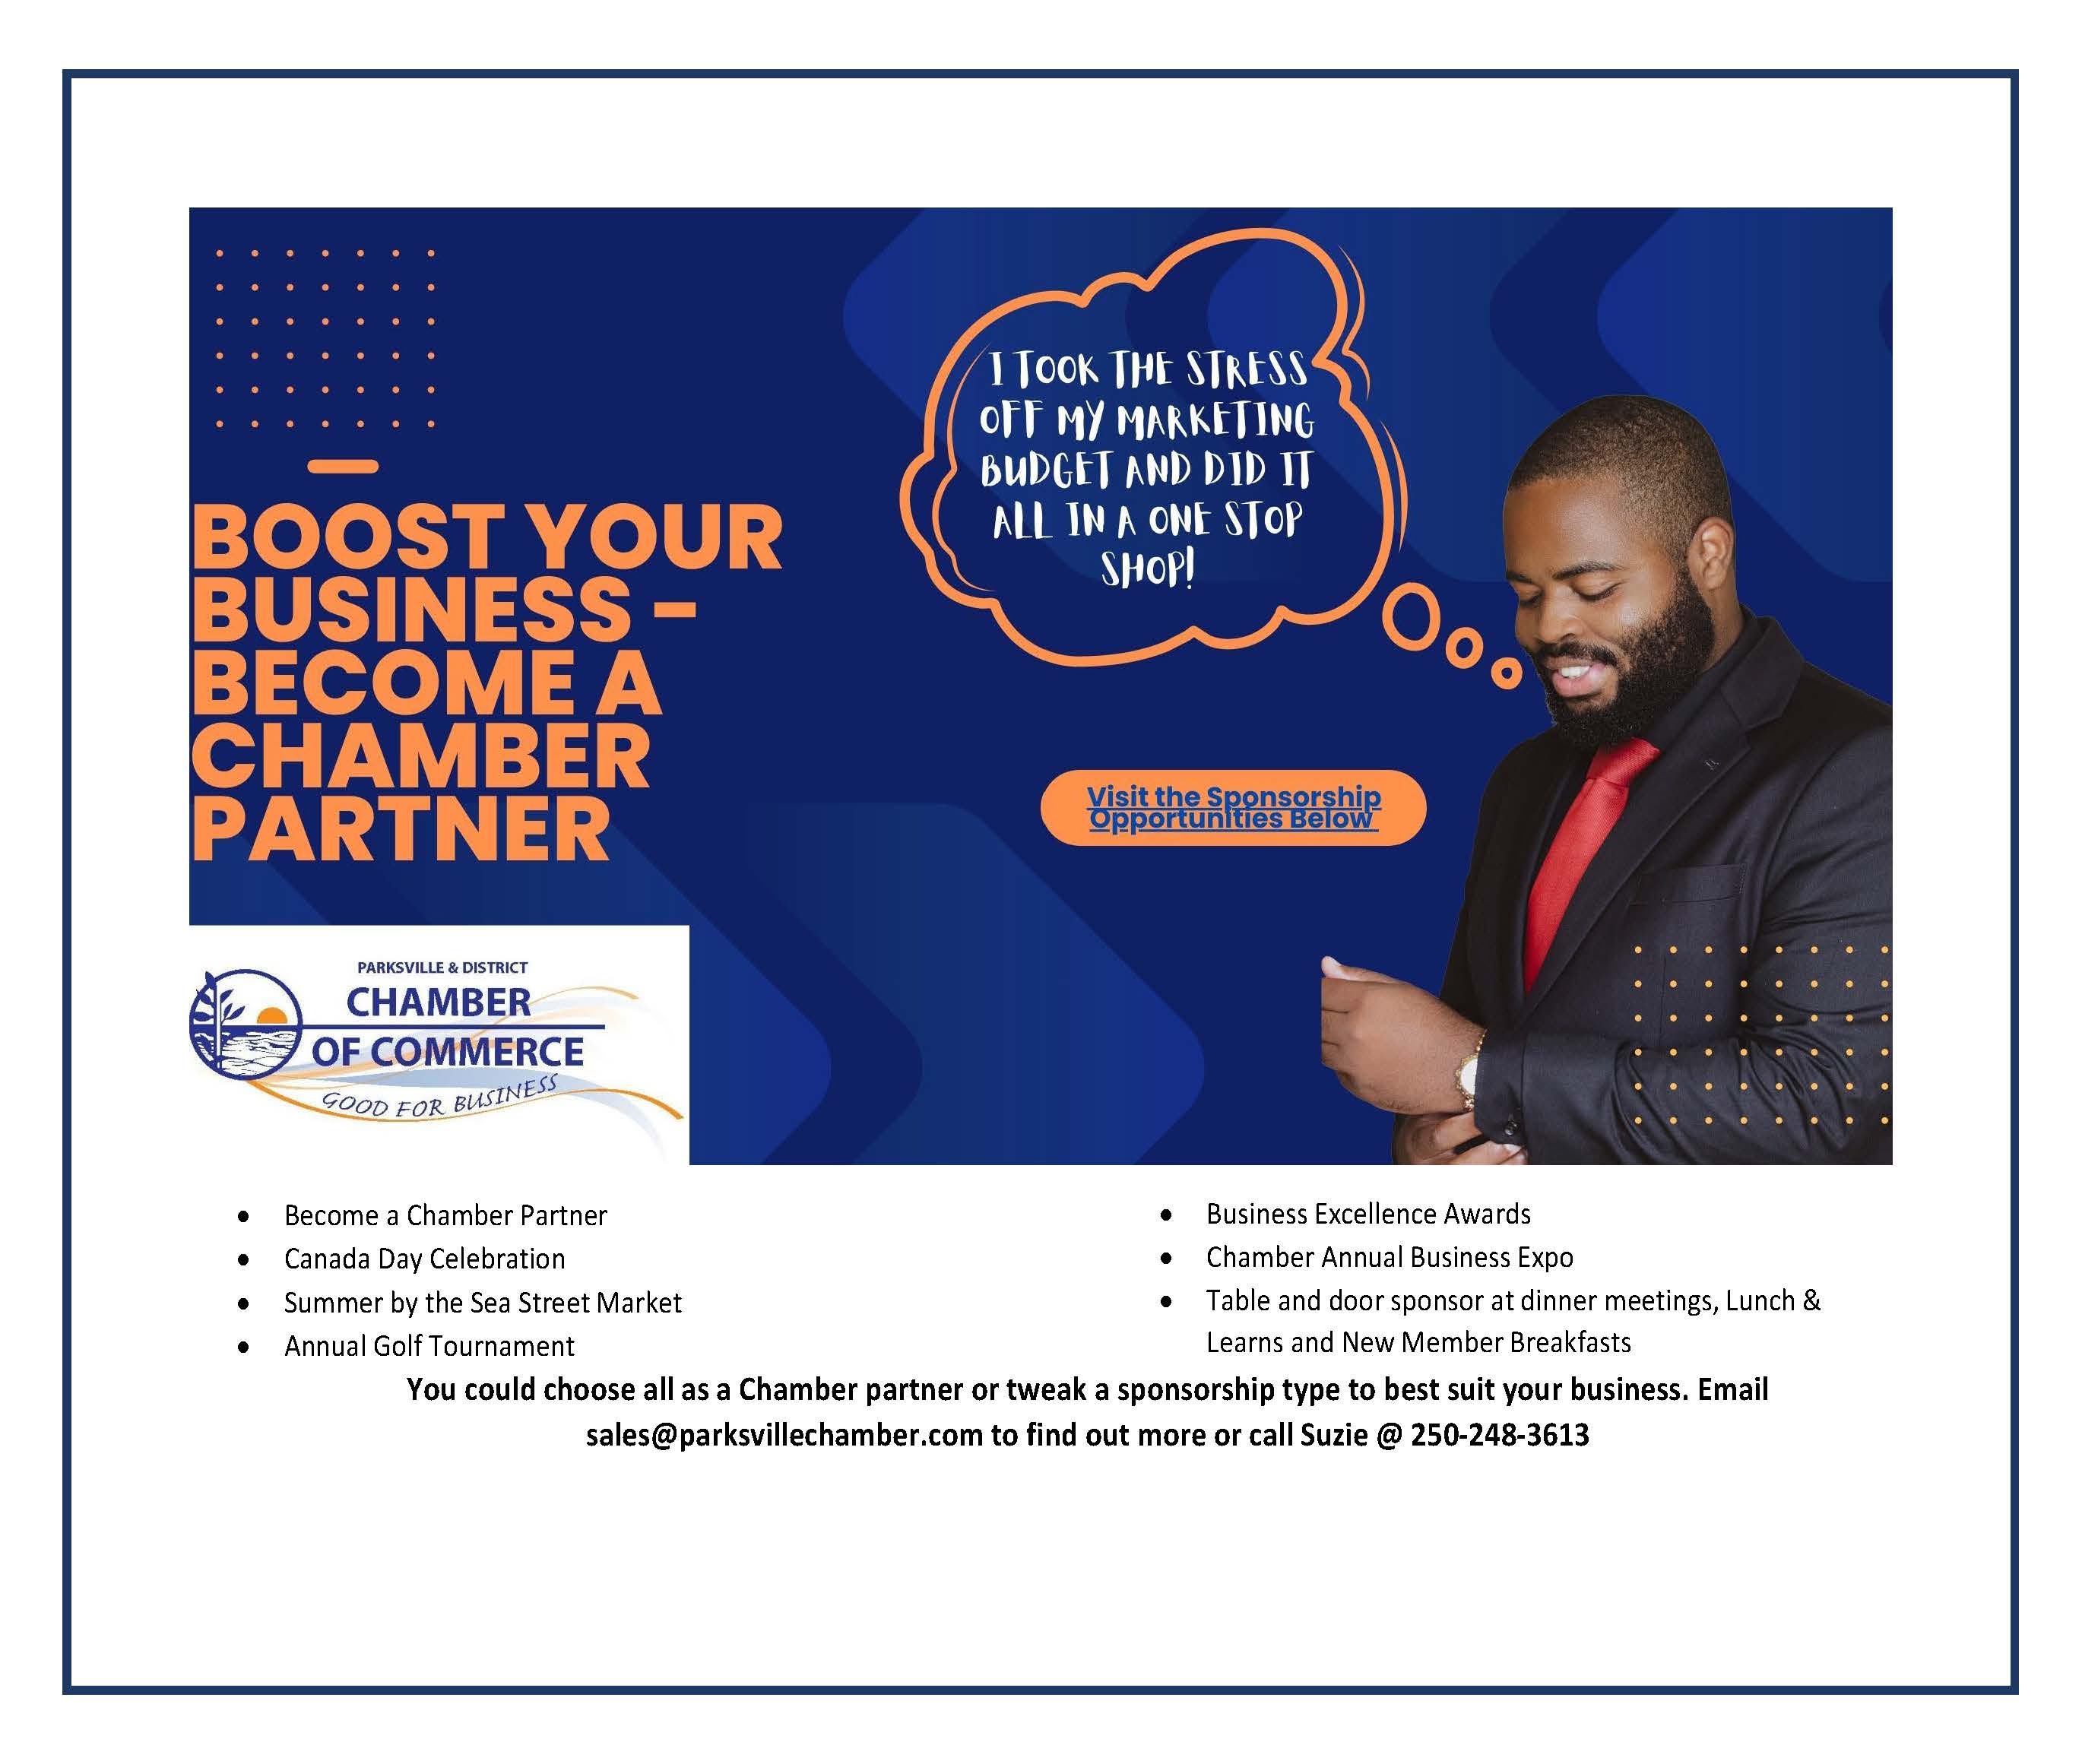 Become a Chamber Partner